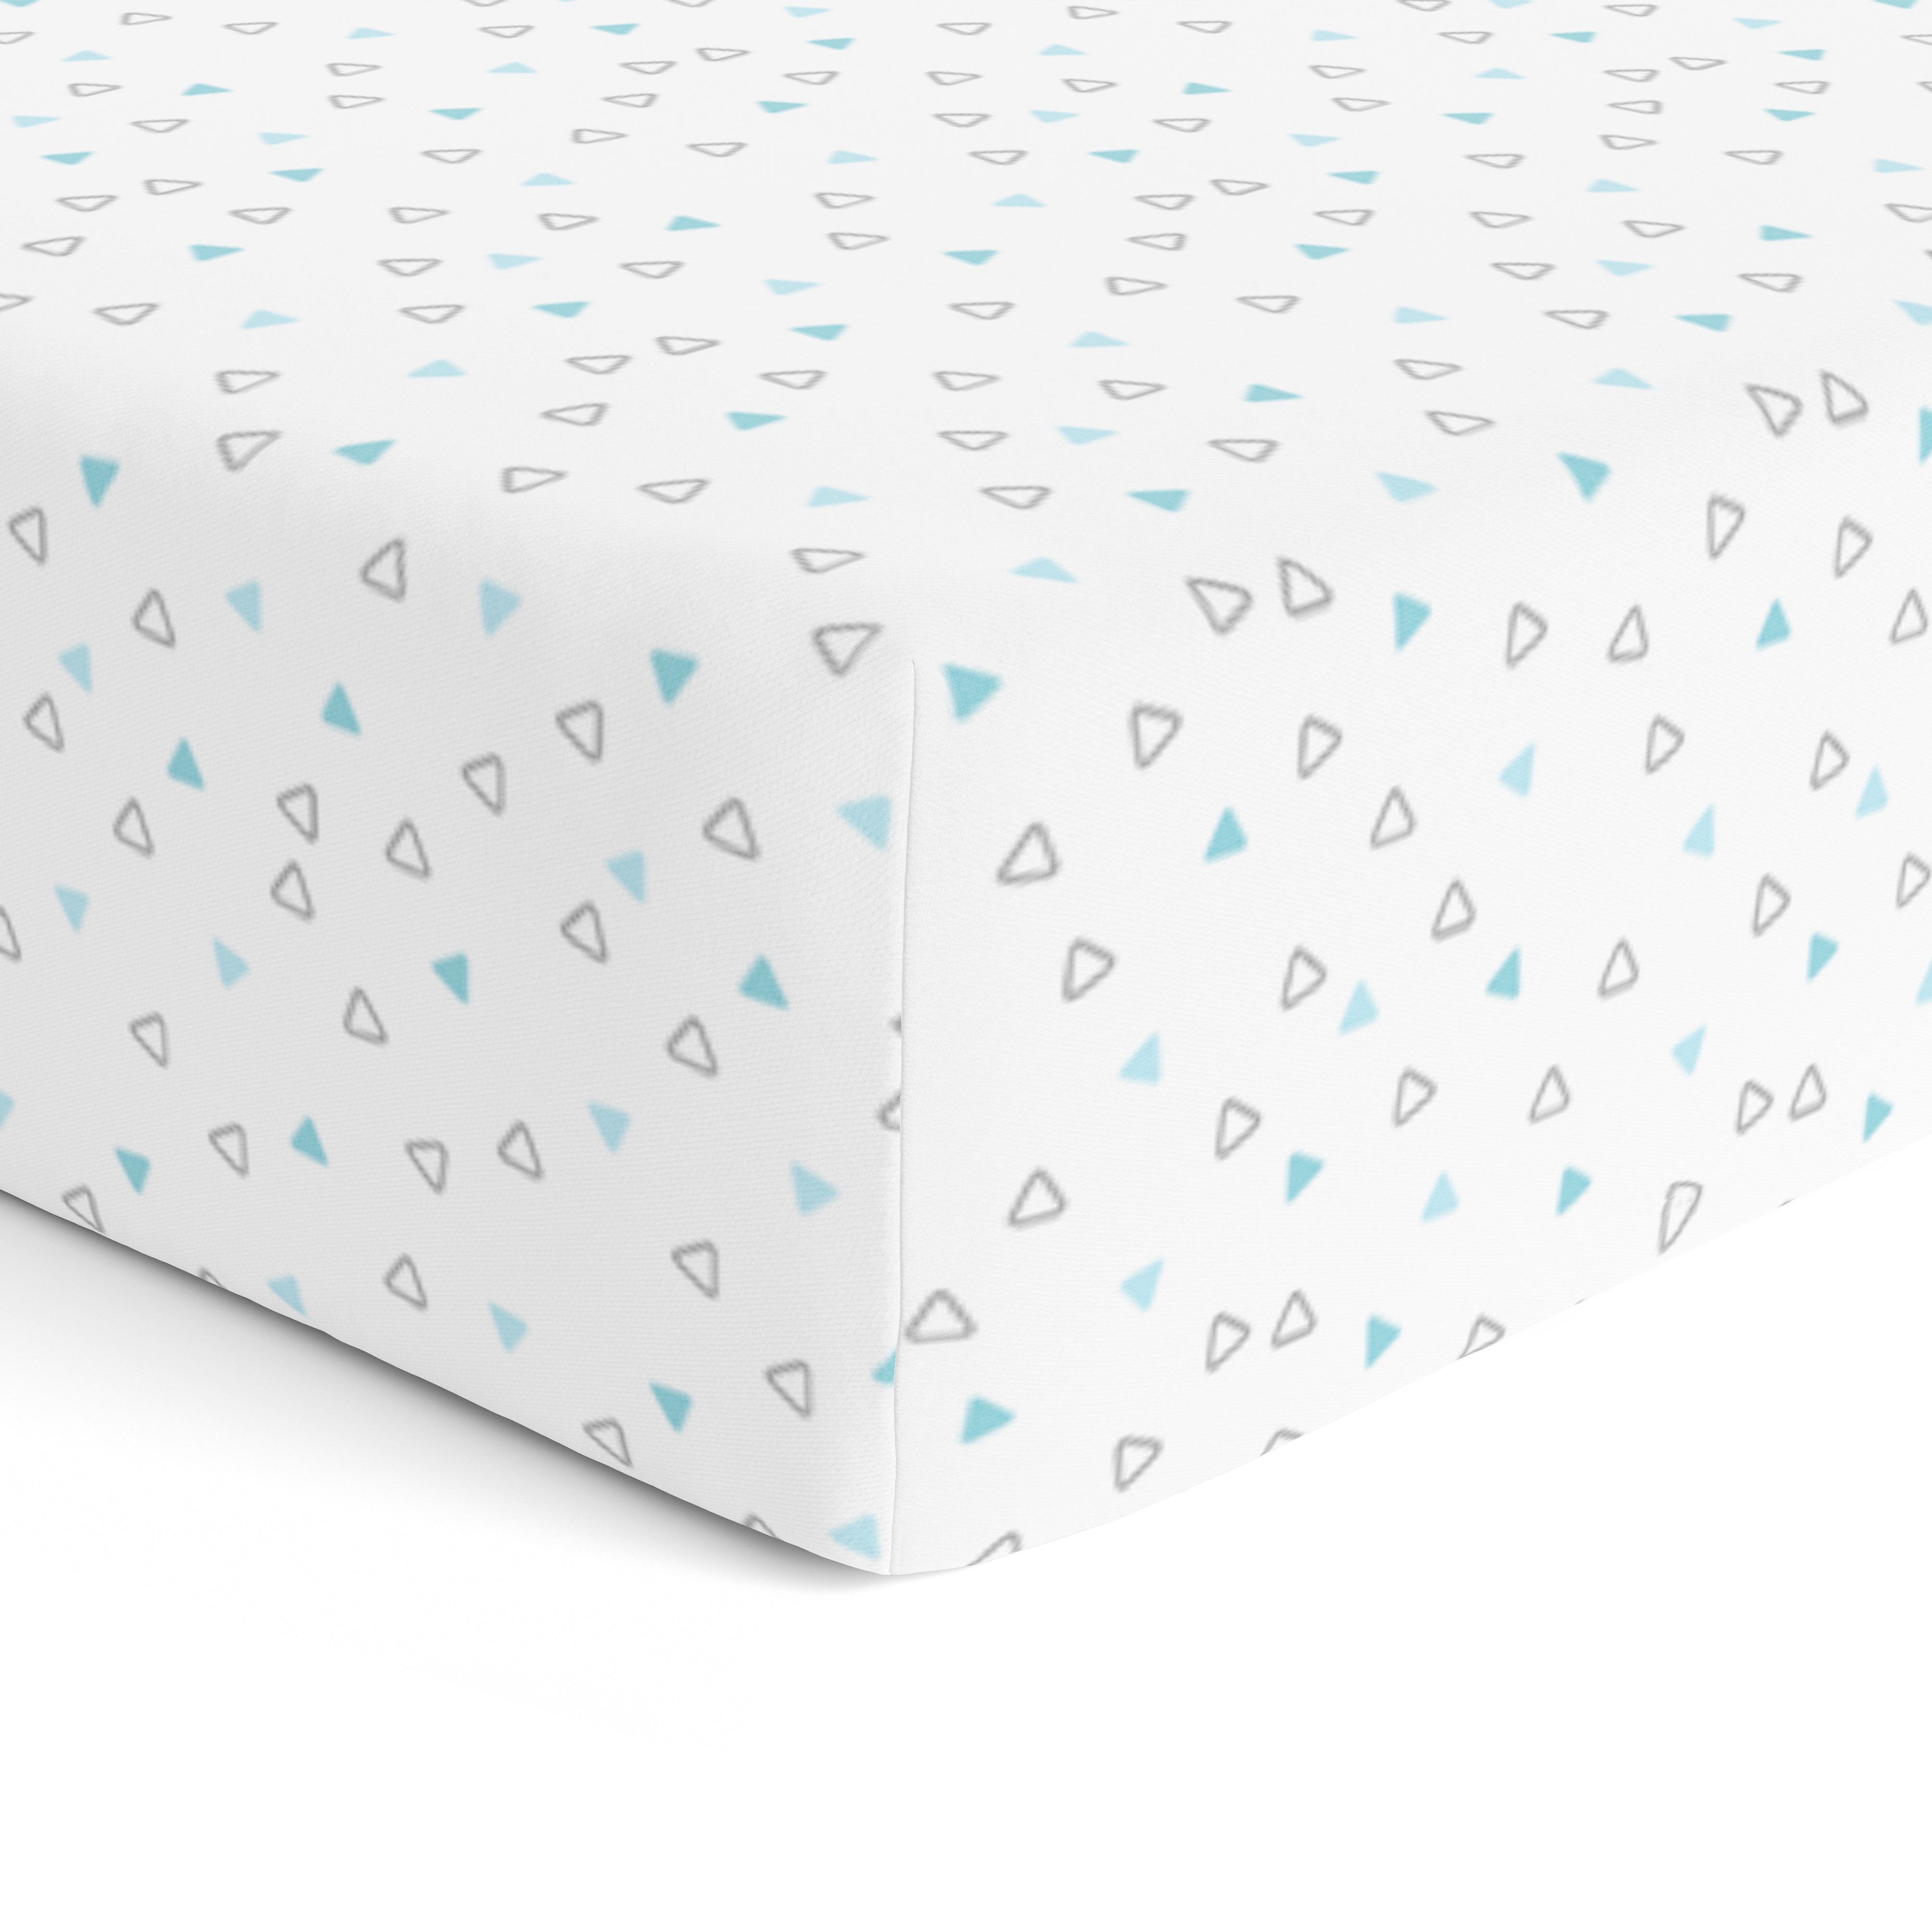 The White Cradle Pure Organic Cotton Fitted Cot Sheet for Baby Crib 28 x 52 inch - Blue Triangles (Large)